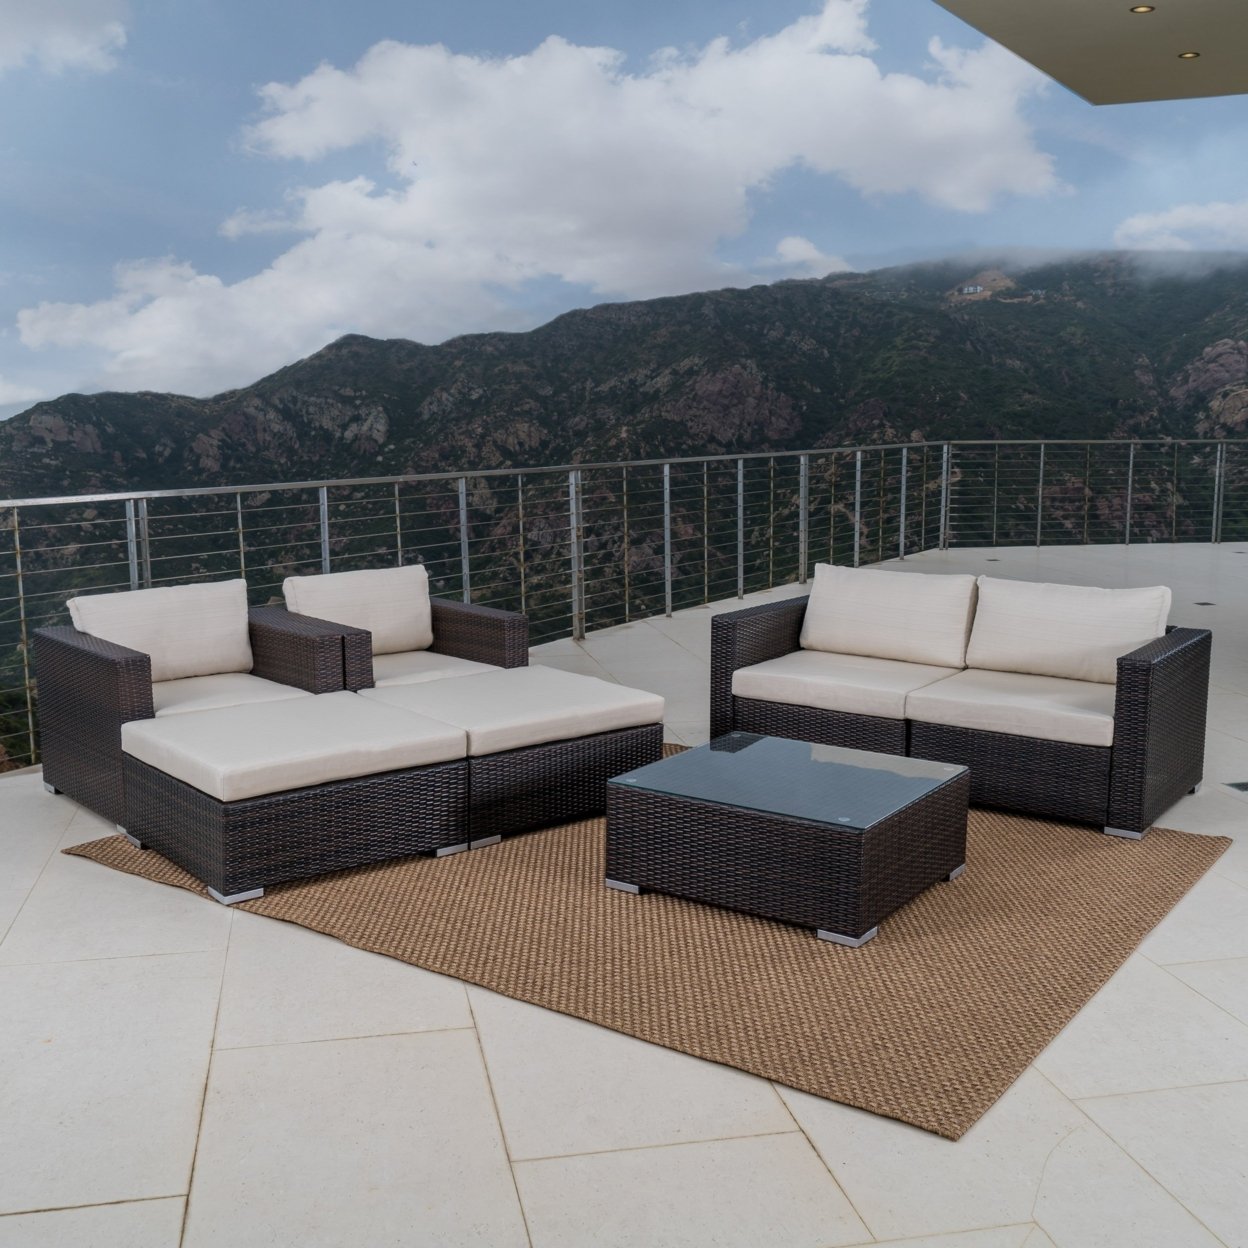 Francisco Outdoor Wicker Sectional With Cushions - Gray/Silver, 7 Piece Set